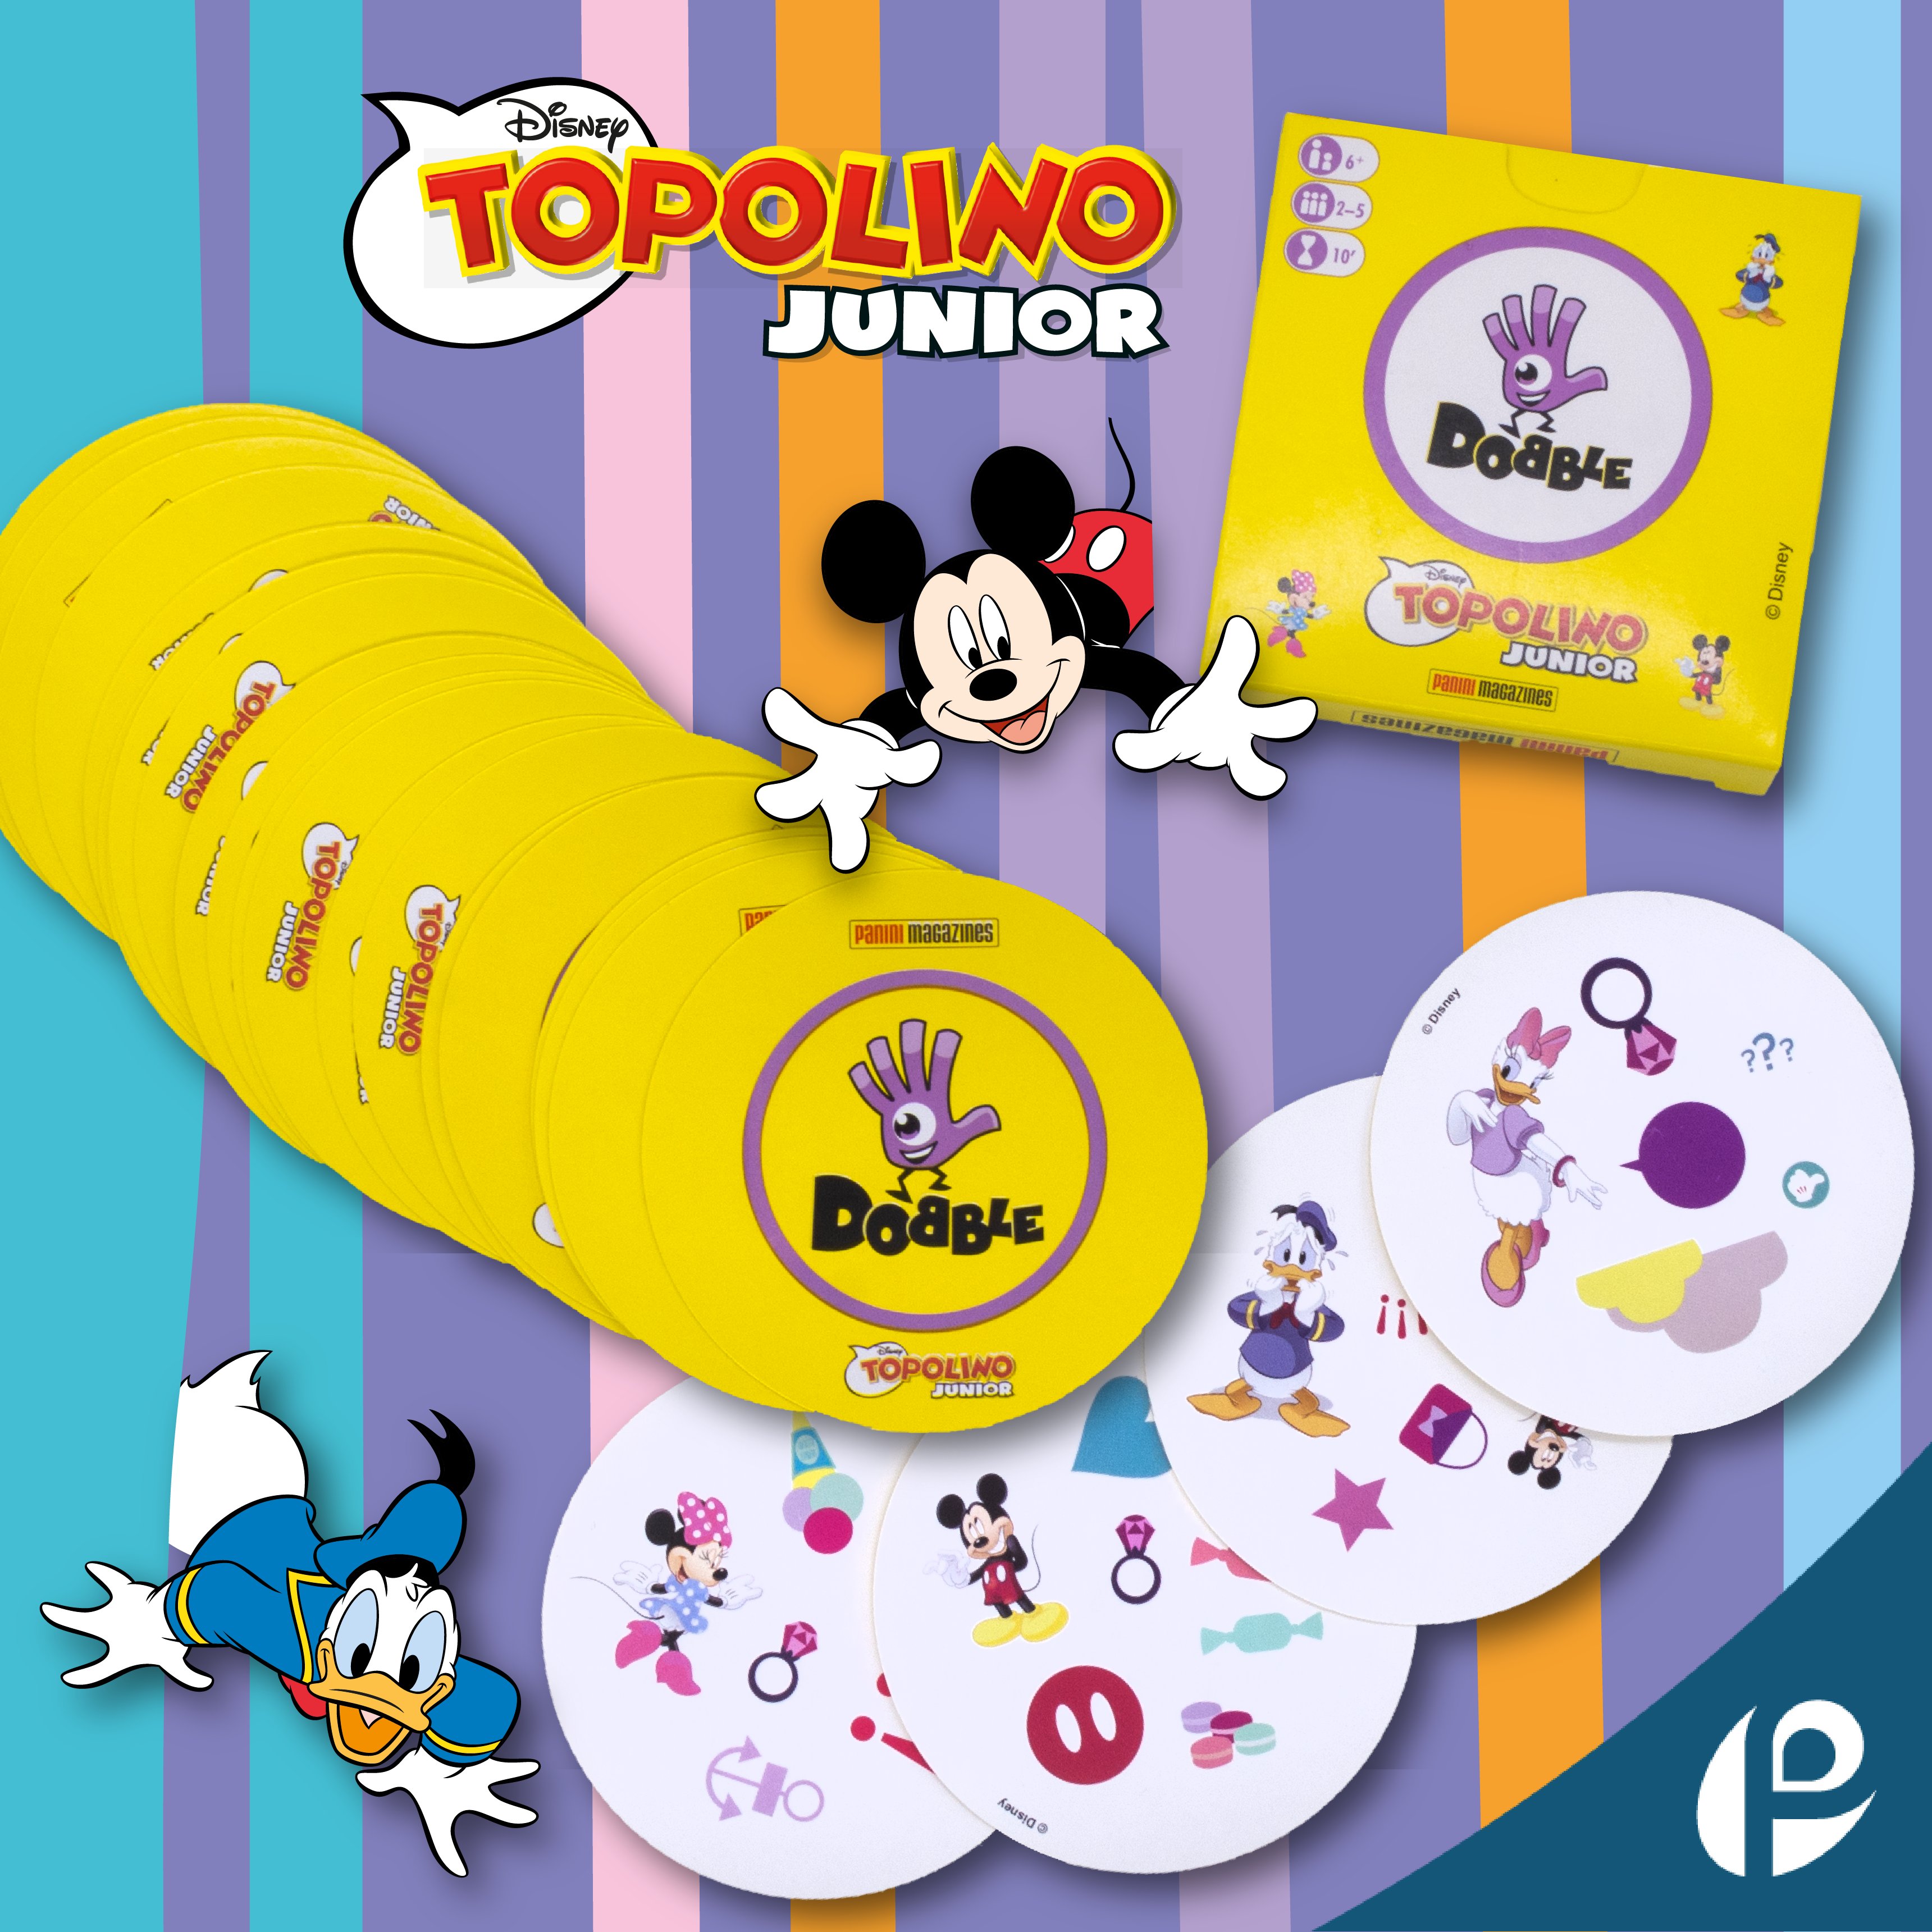 Pea&Promoplast on X: The famous board game @Dobble in a special version  for @topolinomagazine developed and produced by P&P for @panini_comics in  collaboration with @disney . #wemoveyourbusinesstroughemotions  #topolinojunior #dobble #disney #panini